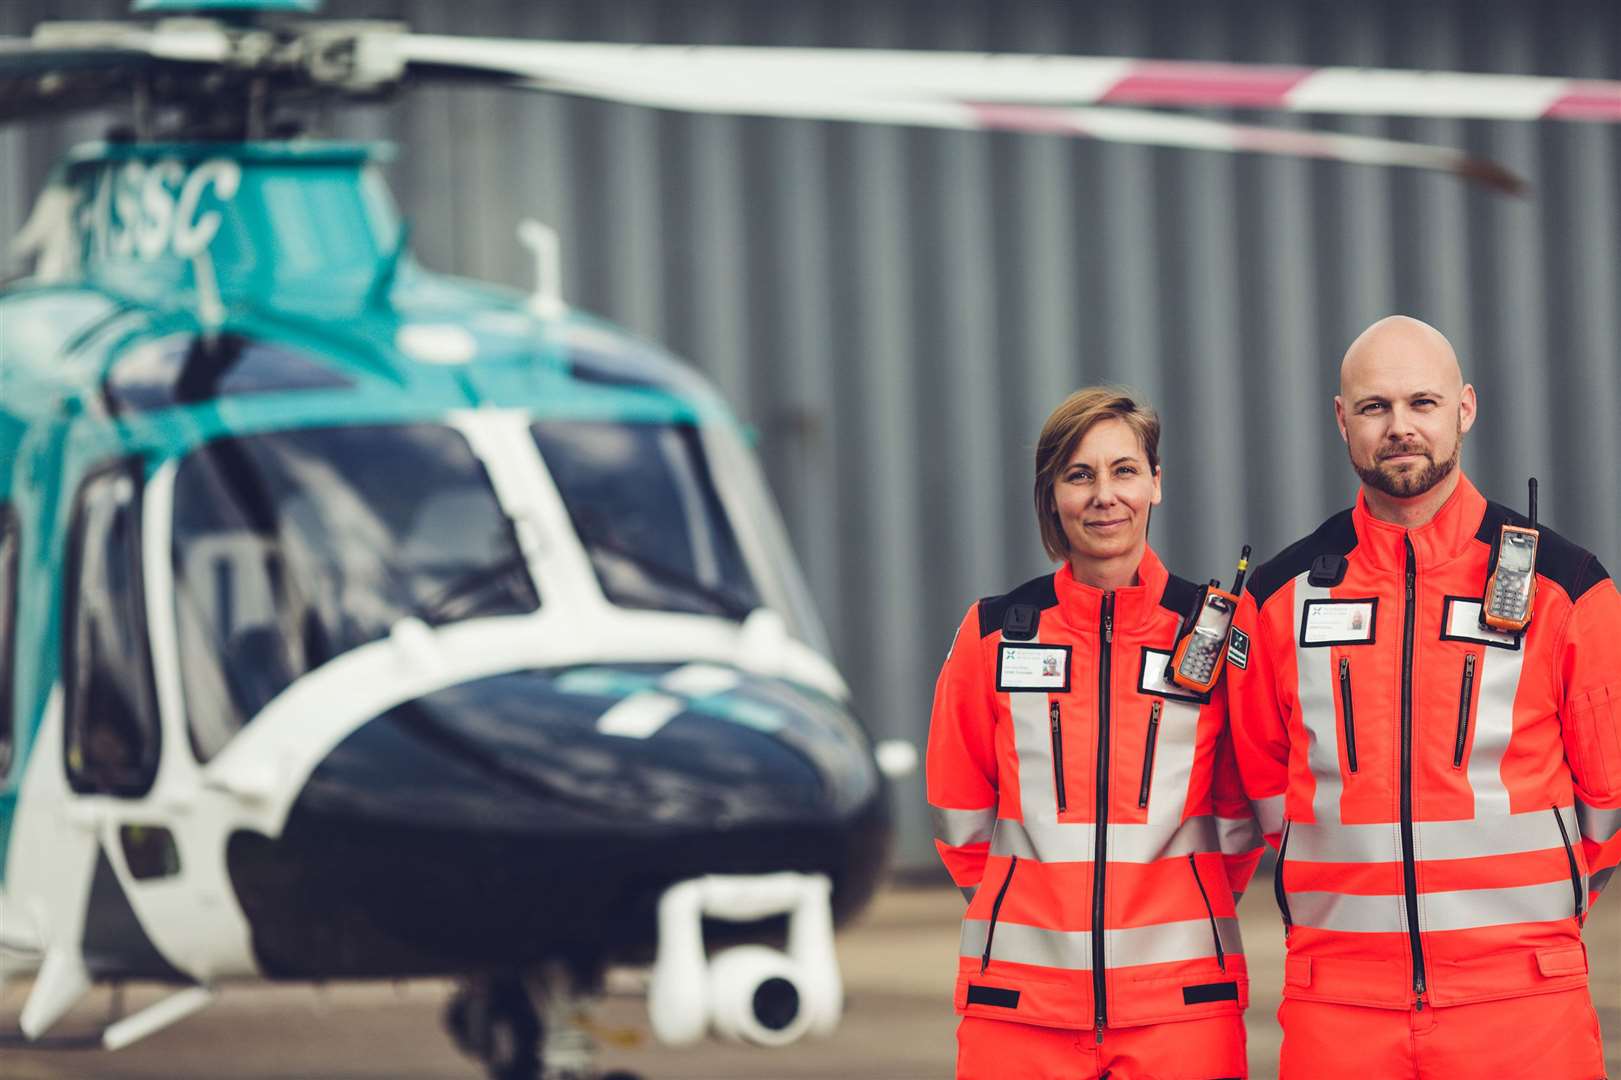 The Kent, Surrey and Sussex Air Ambulance is marking its 30th anniversary